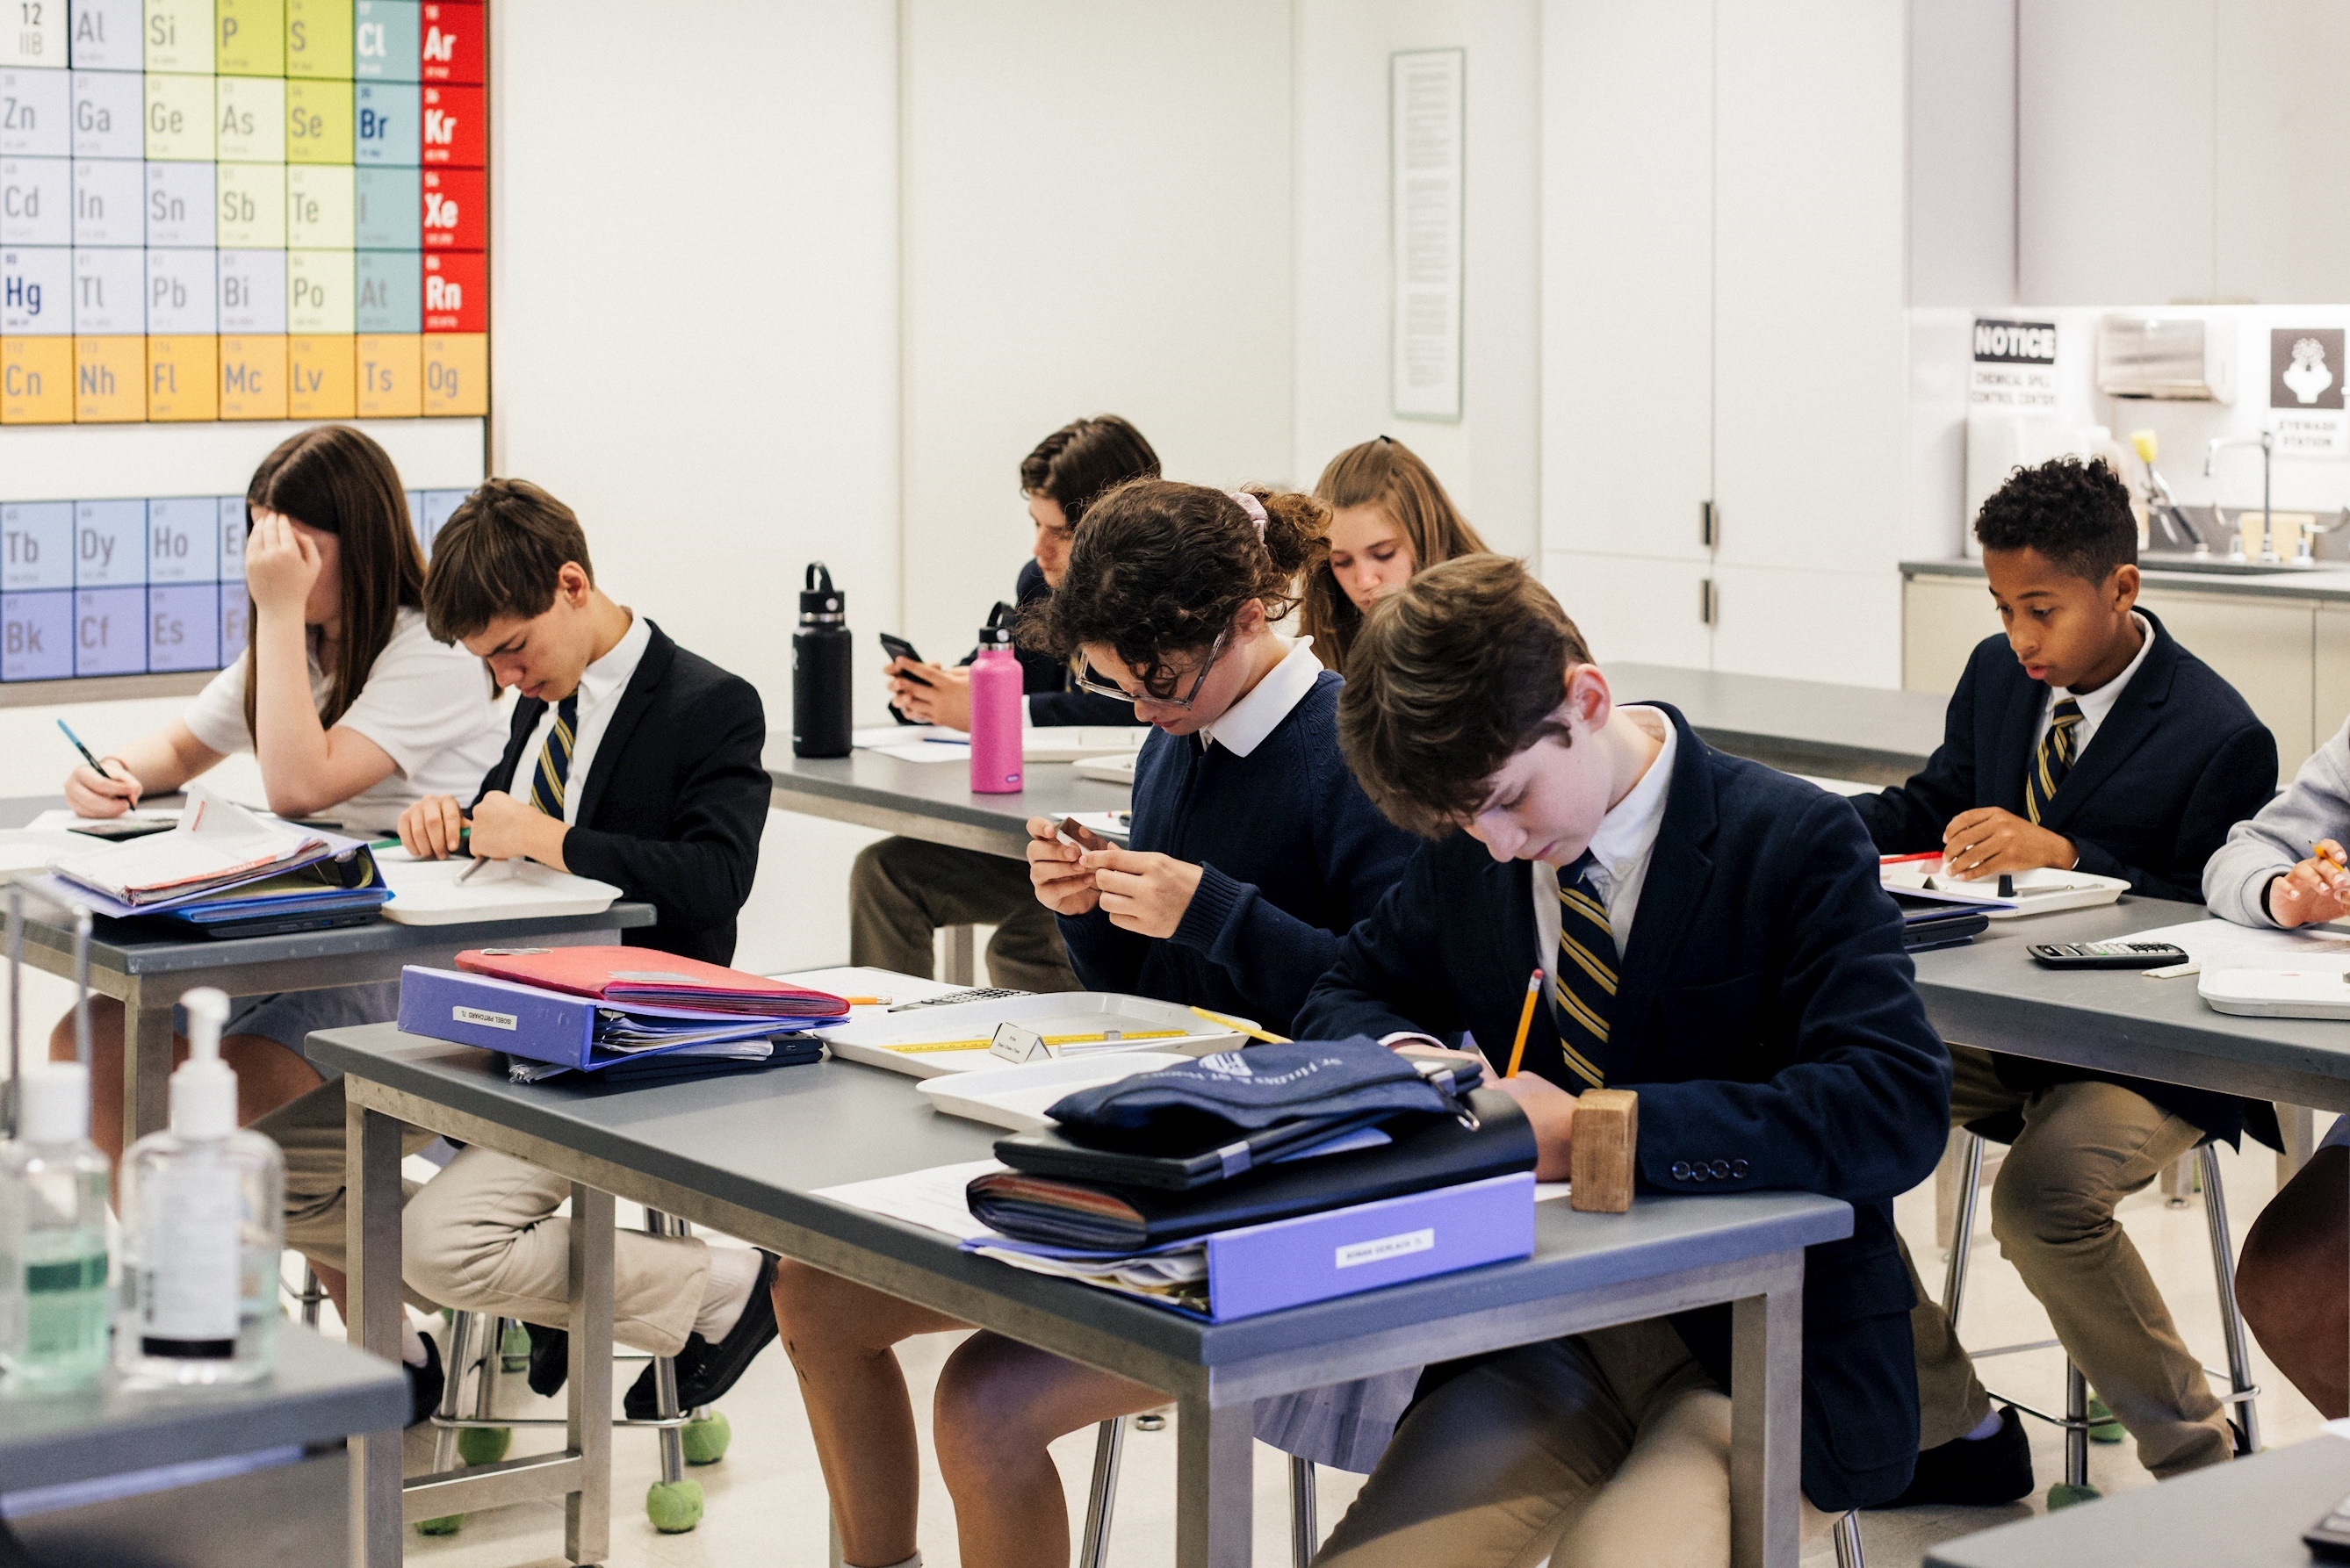 Upper school students focused on their homework, collaborating and studying together in a classroom.